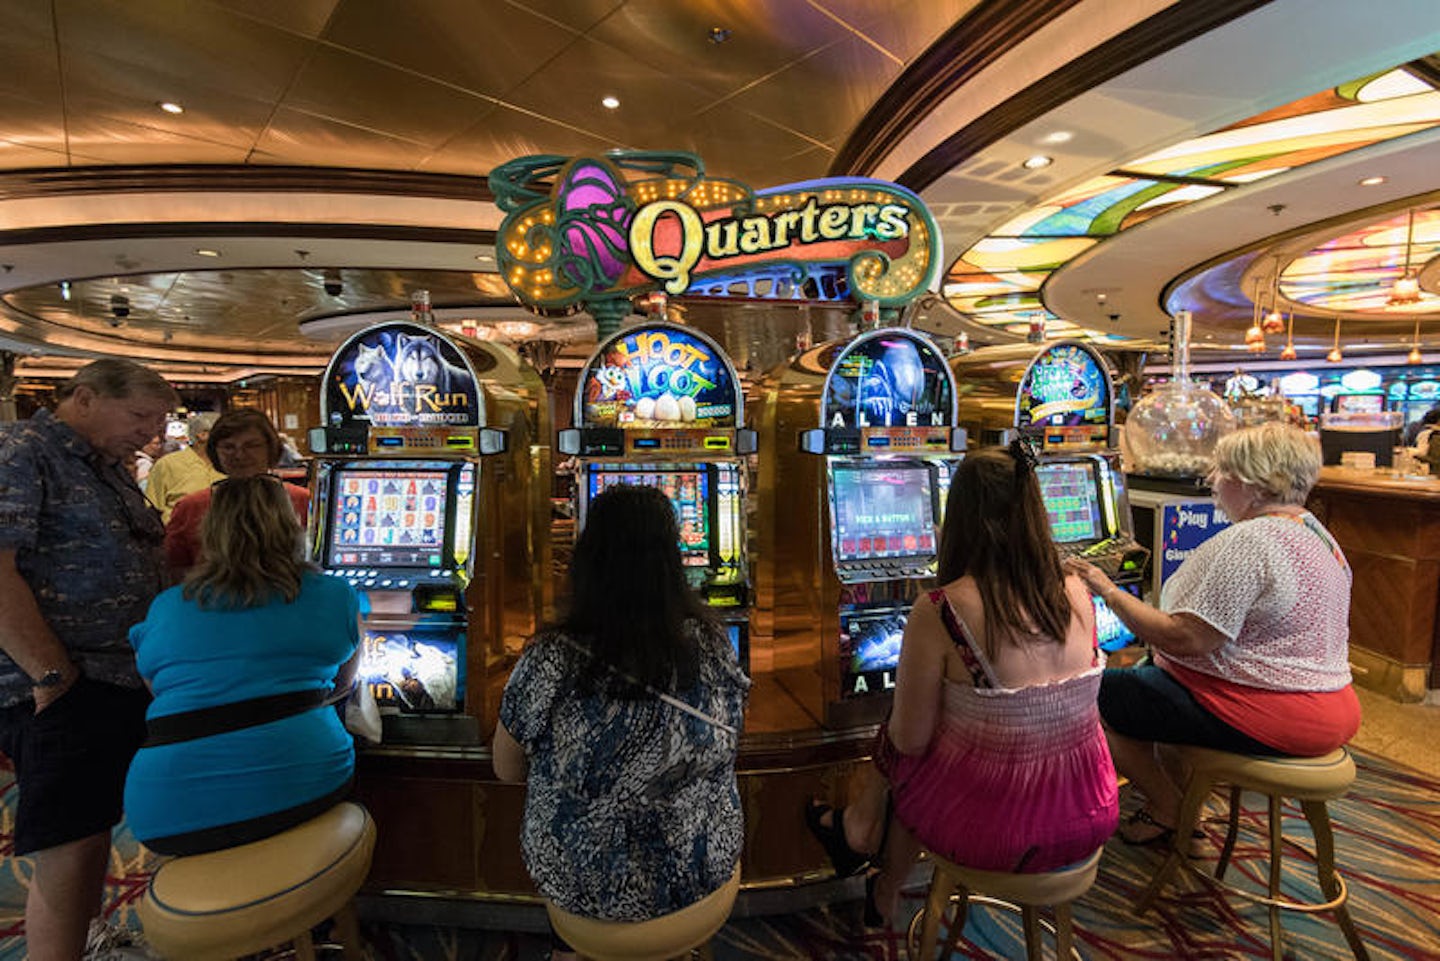 Casino Royale on Brilliance of the Seas